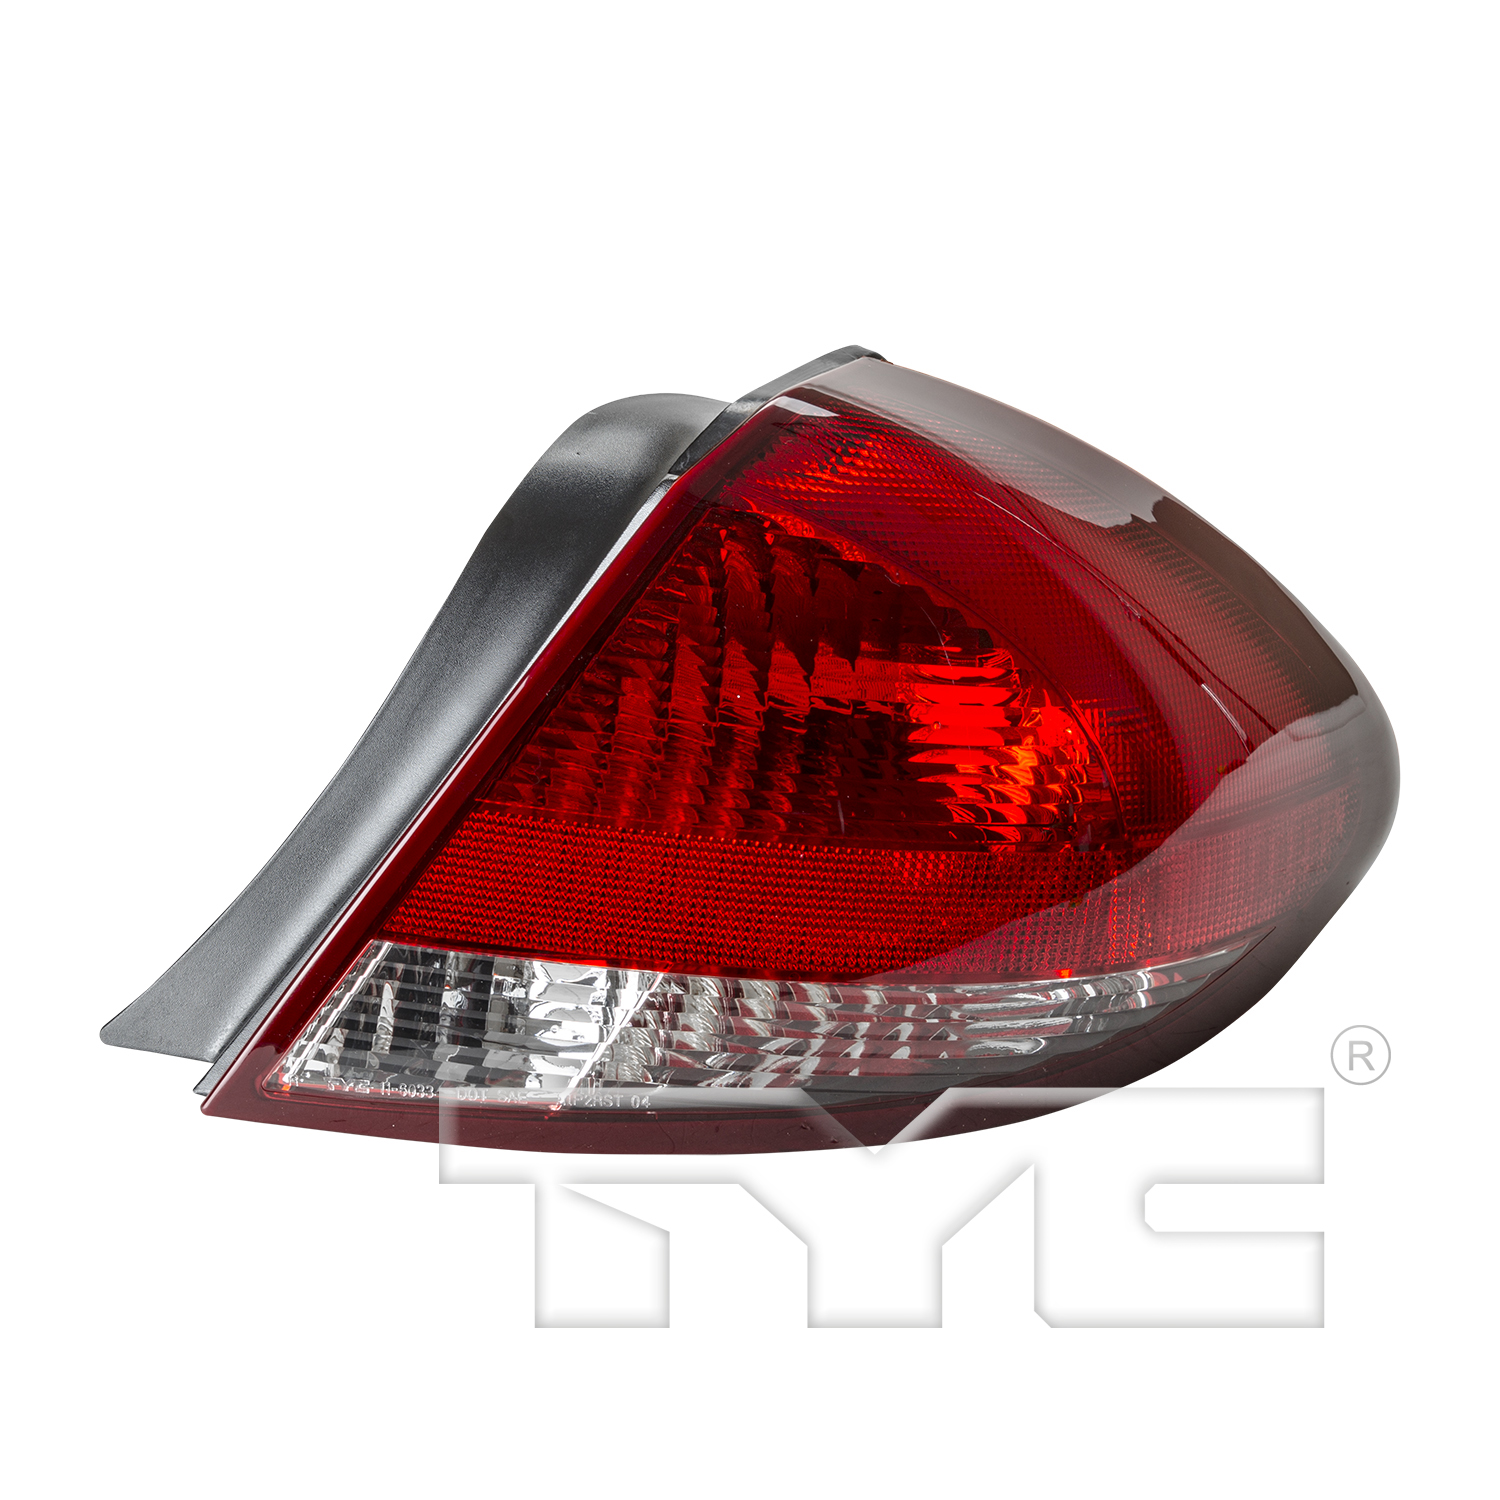 Aftermarket TAILLIGHTS for FORD - TAURUS, TAURUS,04-07,RT Taillamp assy